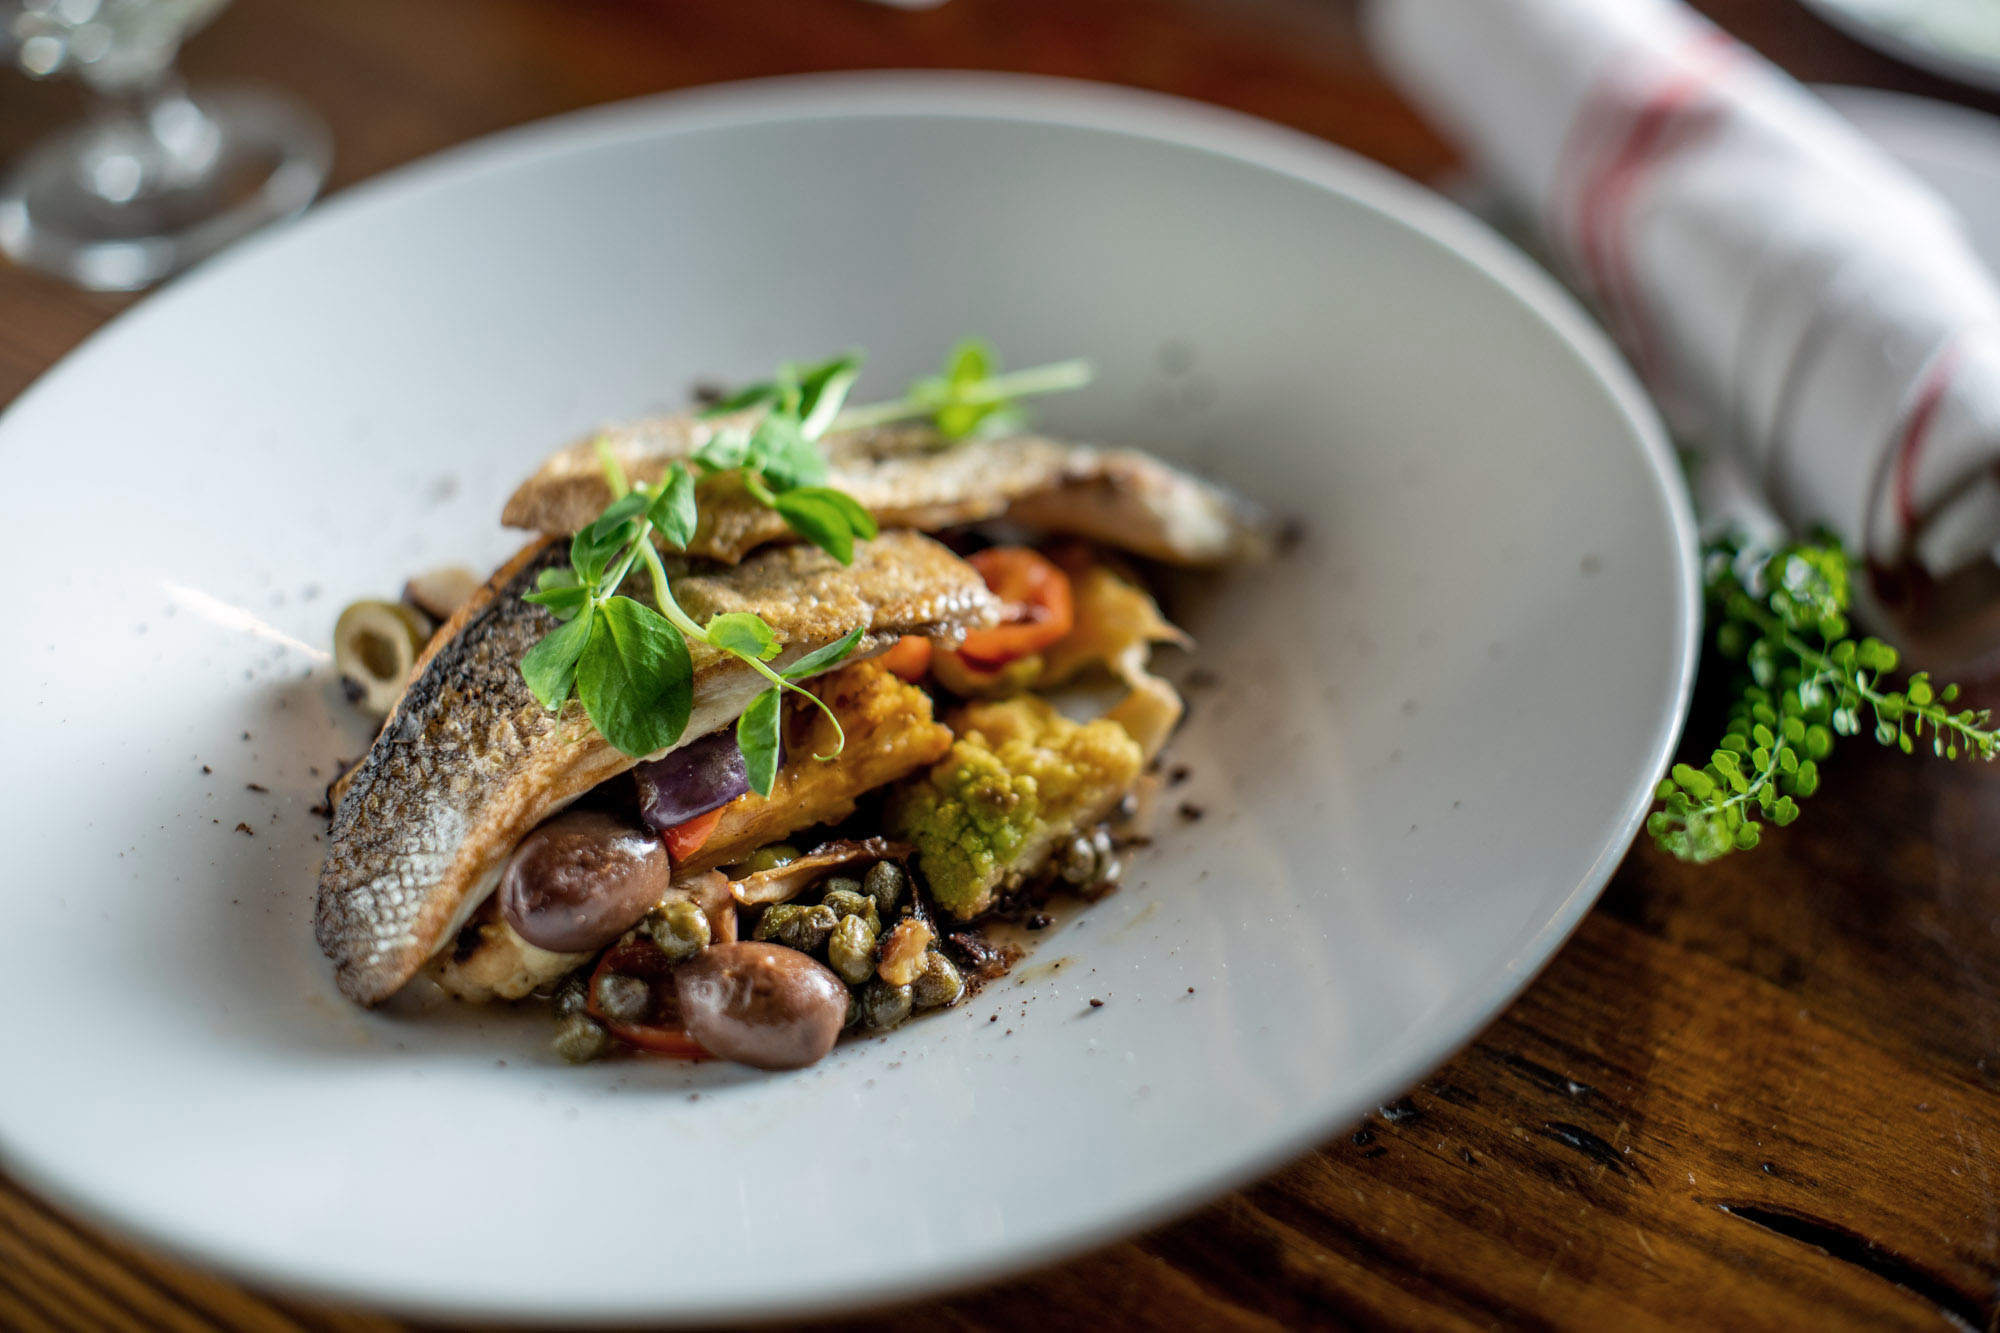 Plate of branzino photographed with an ethereal aesthetic